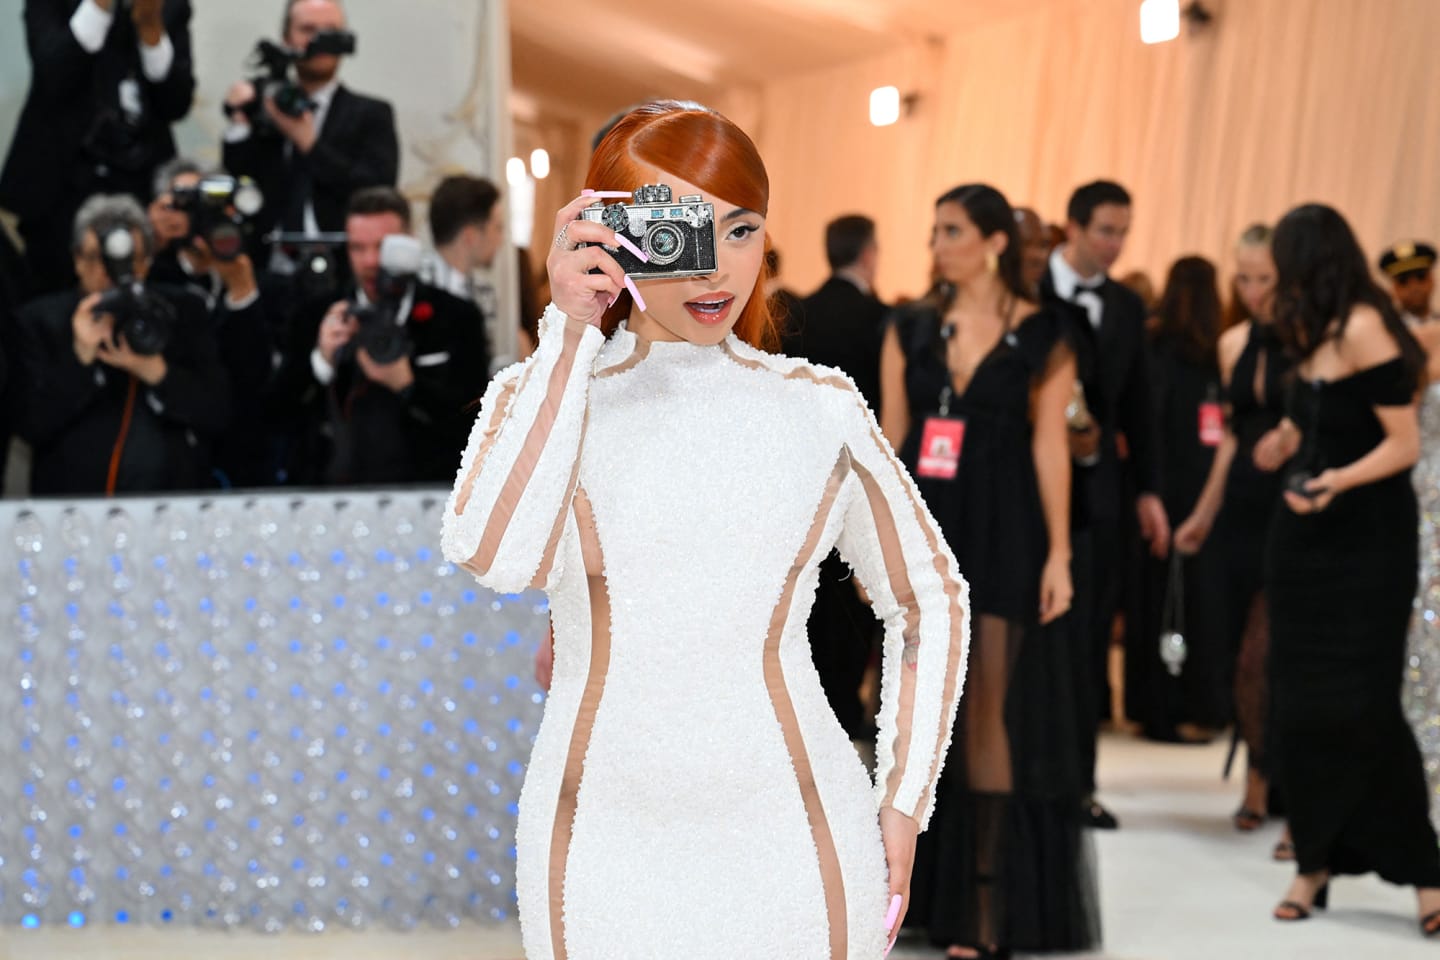 Rapper Ice Spice arrives at her first Met Gala in an all-white Balmain dress.